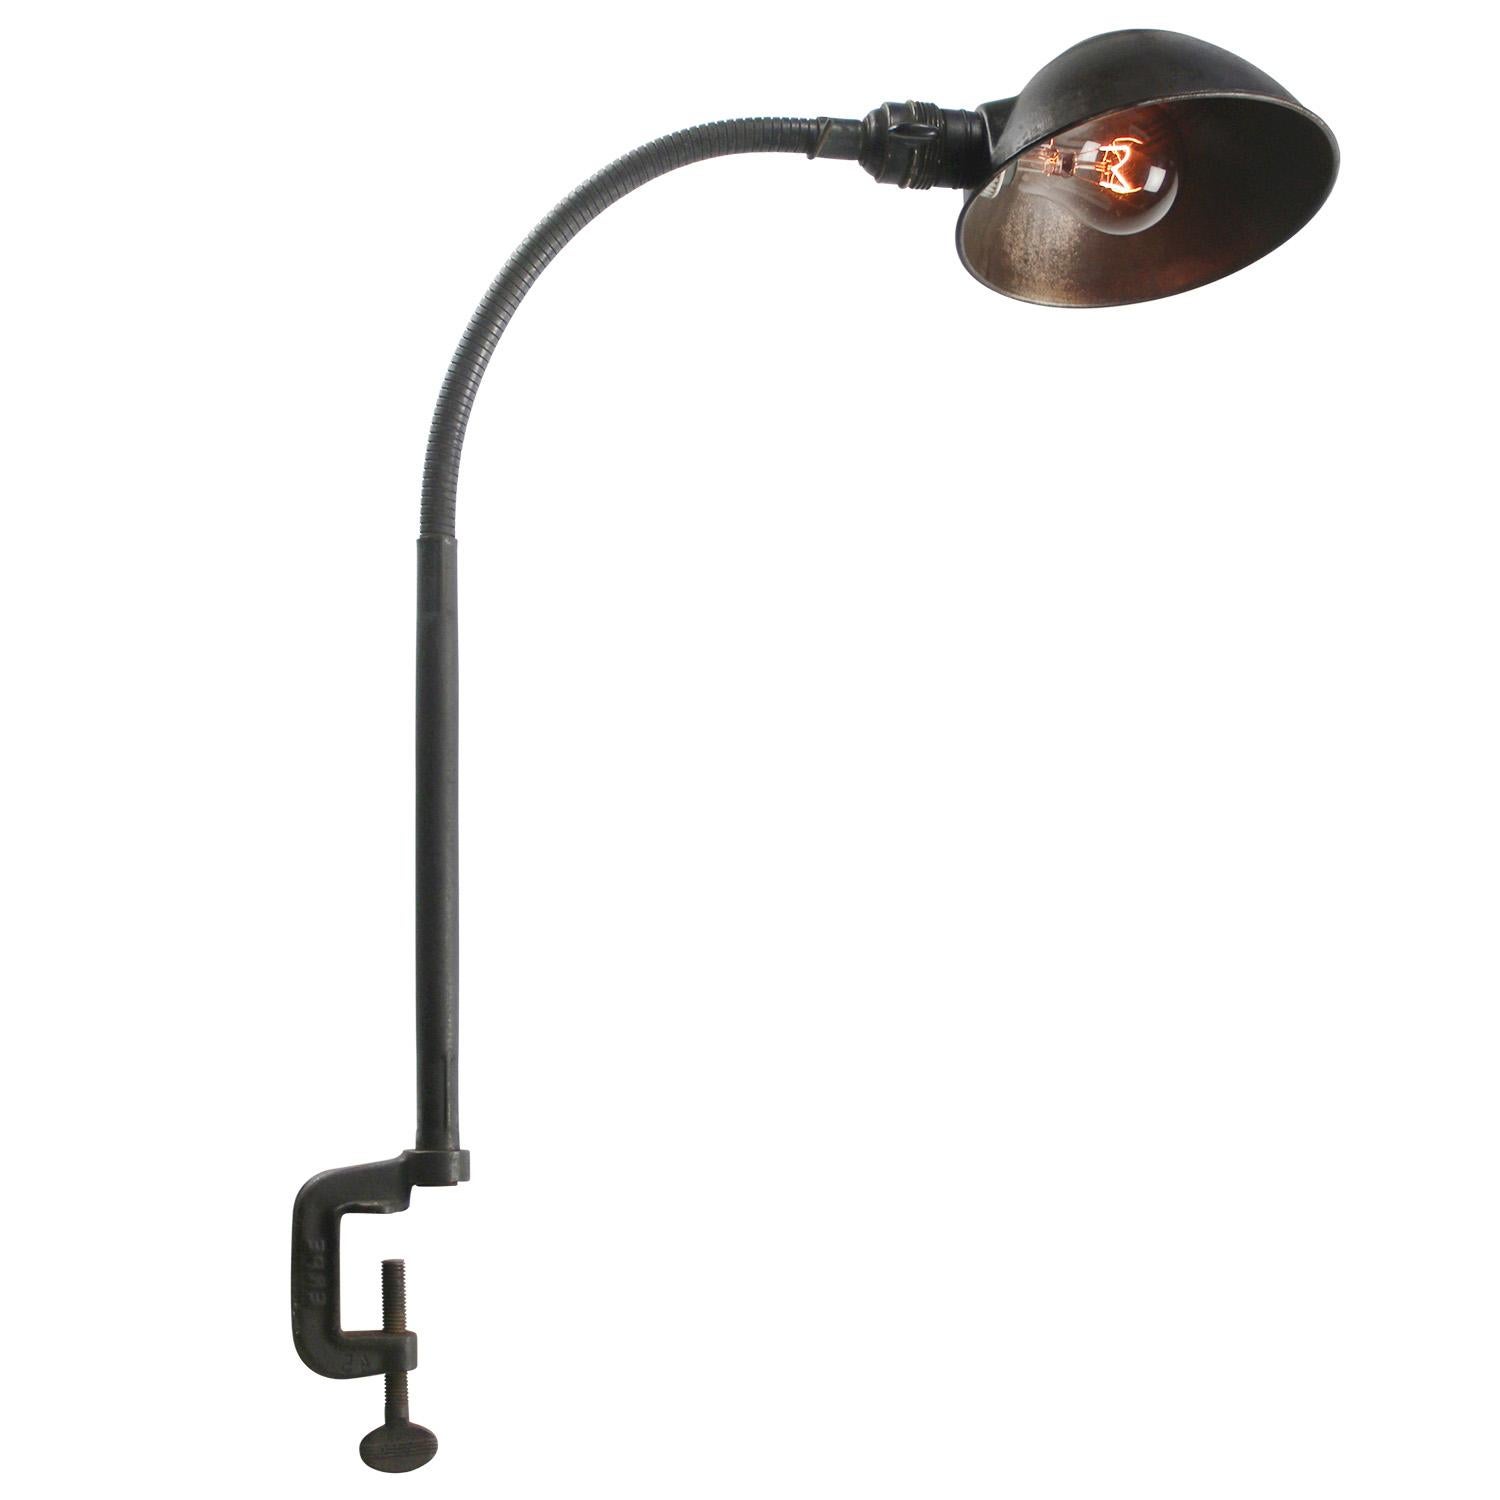 Black iron gooseneck machinist work light by Erpe, France. ca 1950
Adjustable in height and angle
Including plug and switch

Available with UK / US plug

Weight: 1.00 kg / 2.2 lb

Priced per individual item. All lamps have been made suitable by